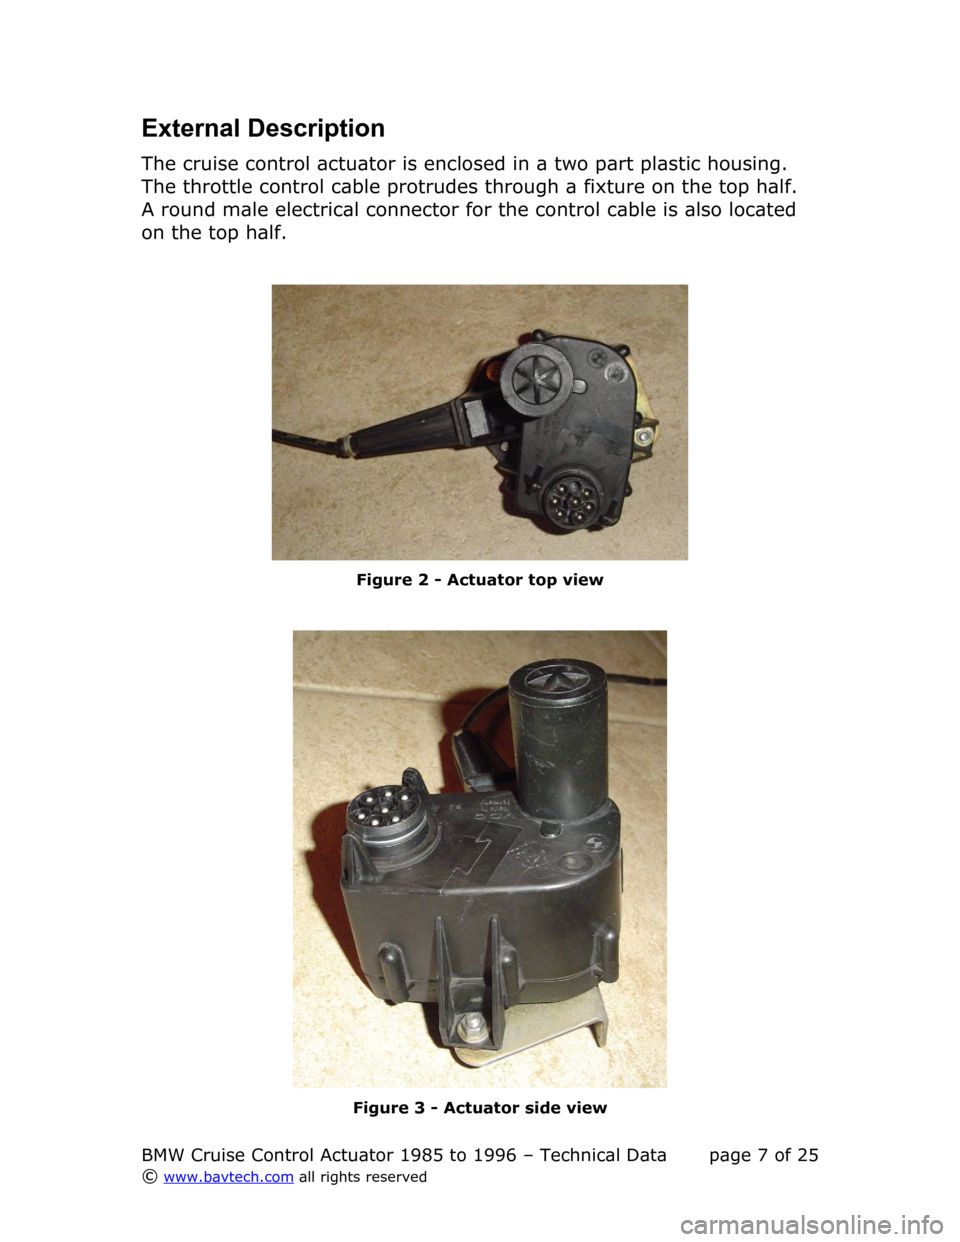 BMW 3 SERIES 1995 E36 Cruise Control Acutator External Description
The cruise control actuator is enclosed in a two part plastic housing.  
The throttle control cable protrudes through a fixture on the top half.  
A round male electrical connecto